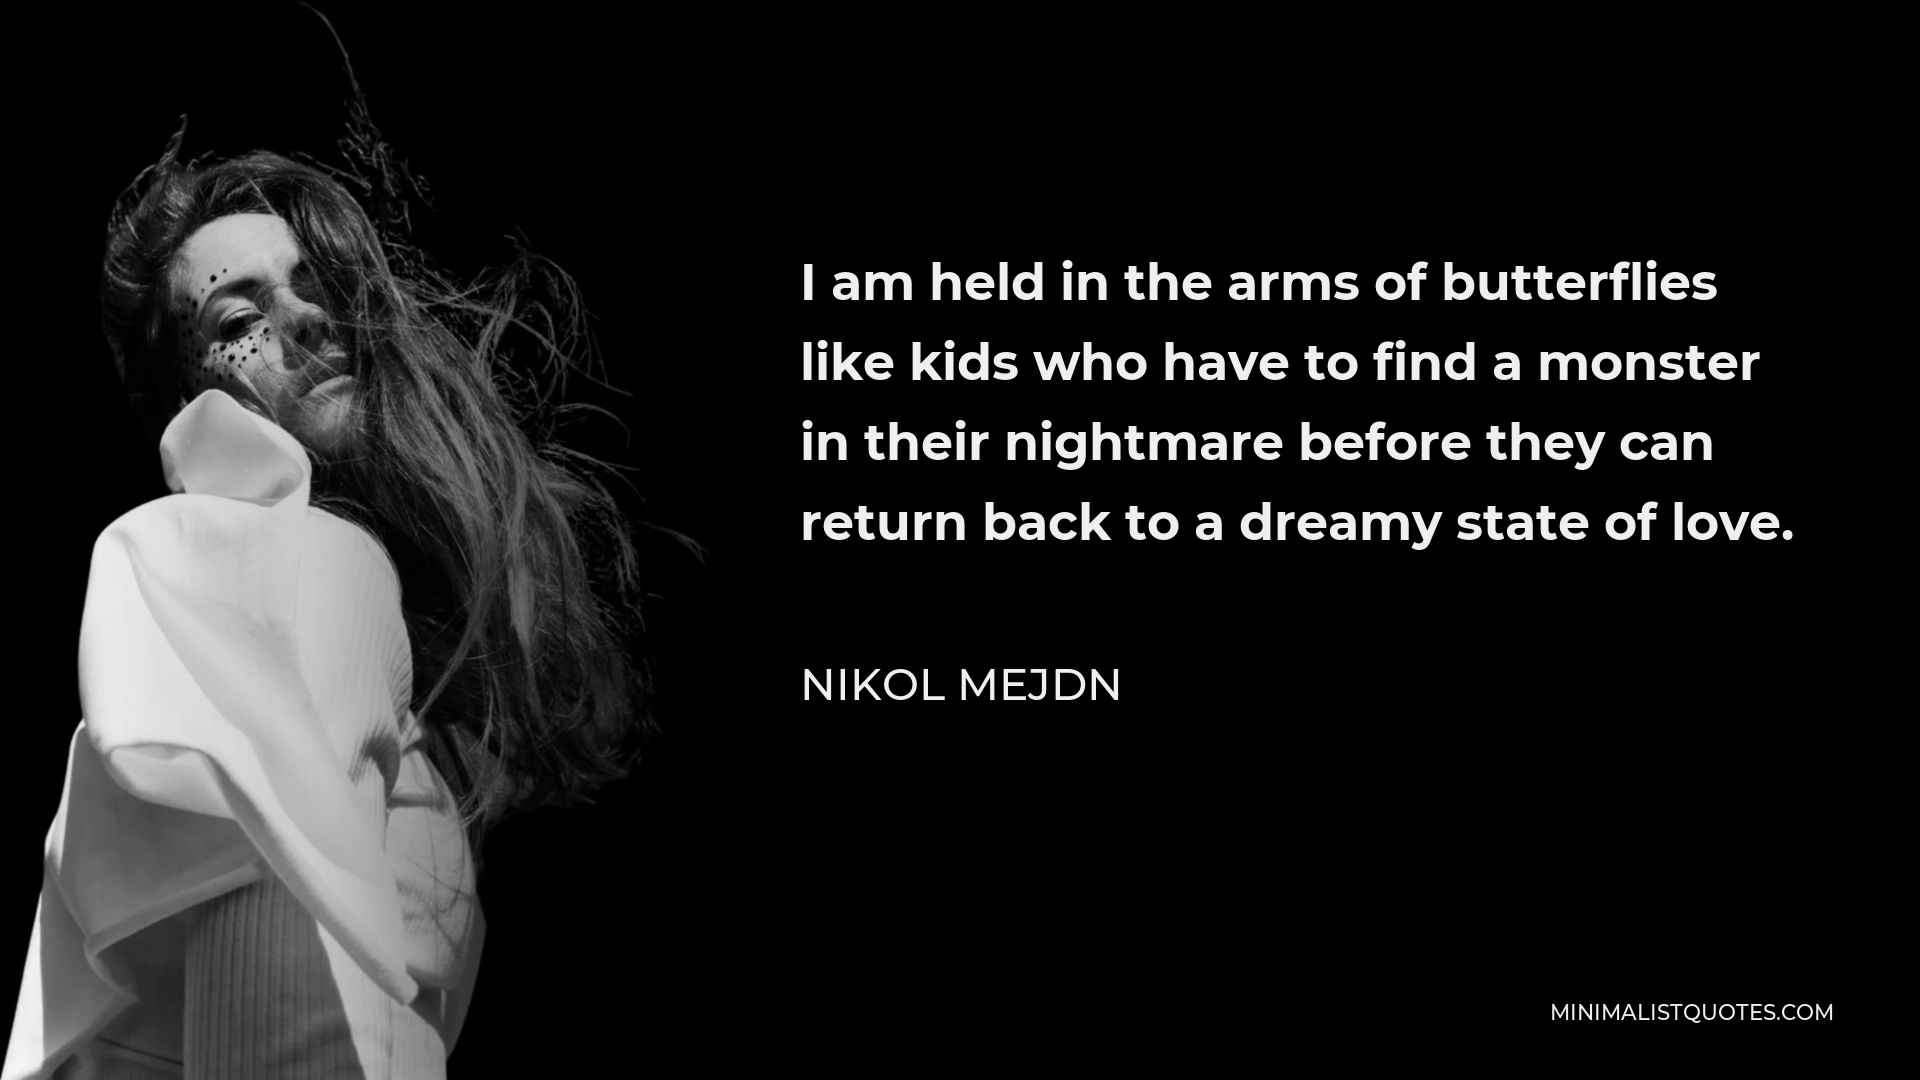 Nikol Mejdn Quote - I am held in the arms of butterflies like kids who have to find a monster in their nightmare before they can return back to a dreamy state of love.